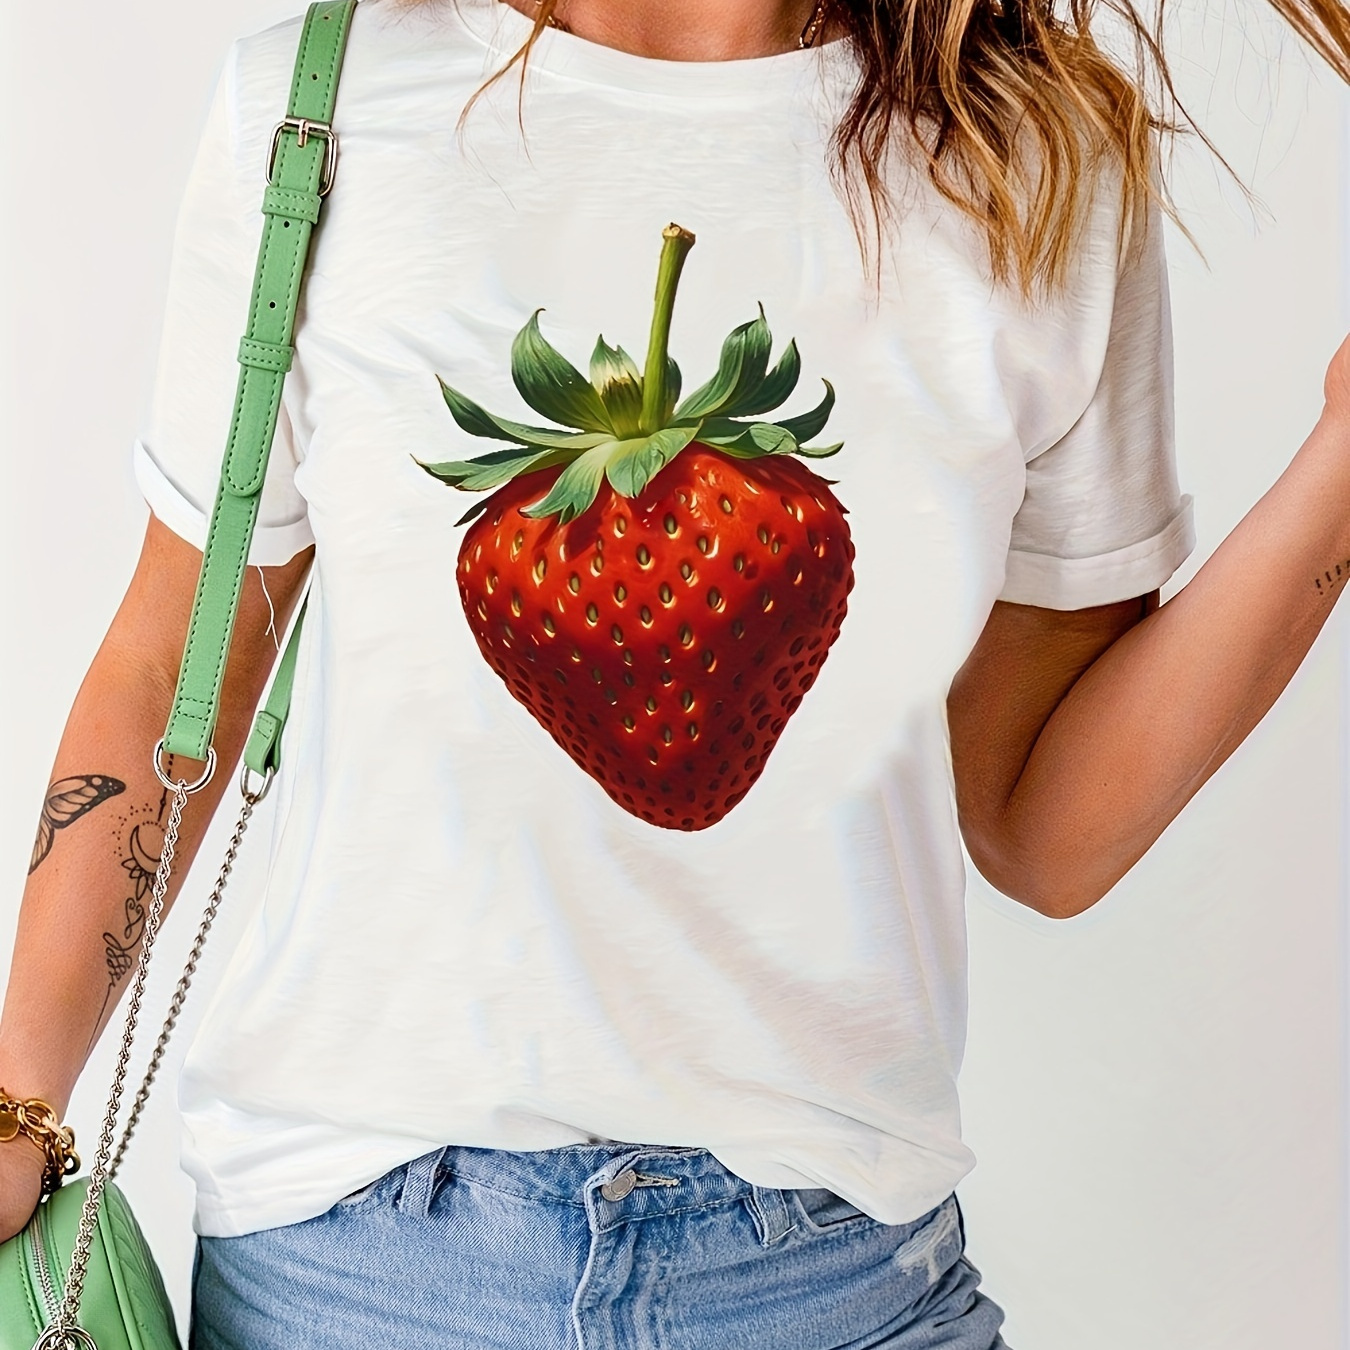 

Strawberry Print T-shirt, Short Sleeve Crew Neck Casual Top For Summer & Spring, Women's Clothing